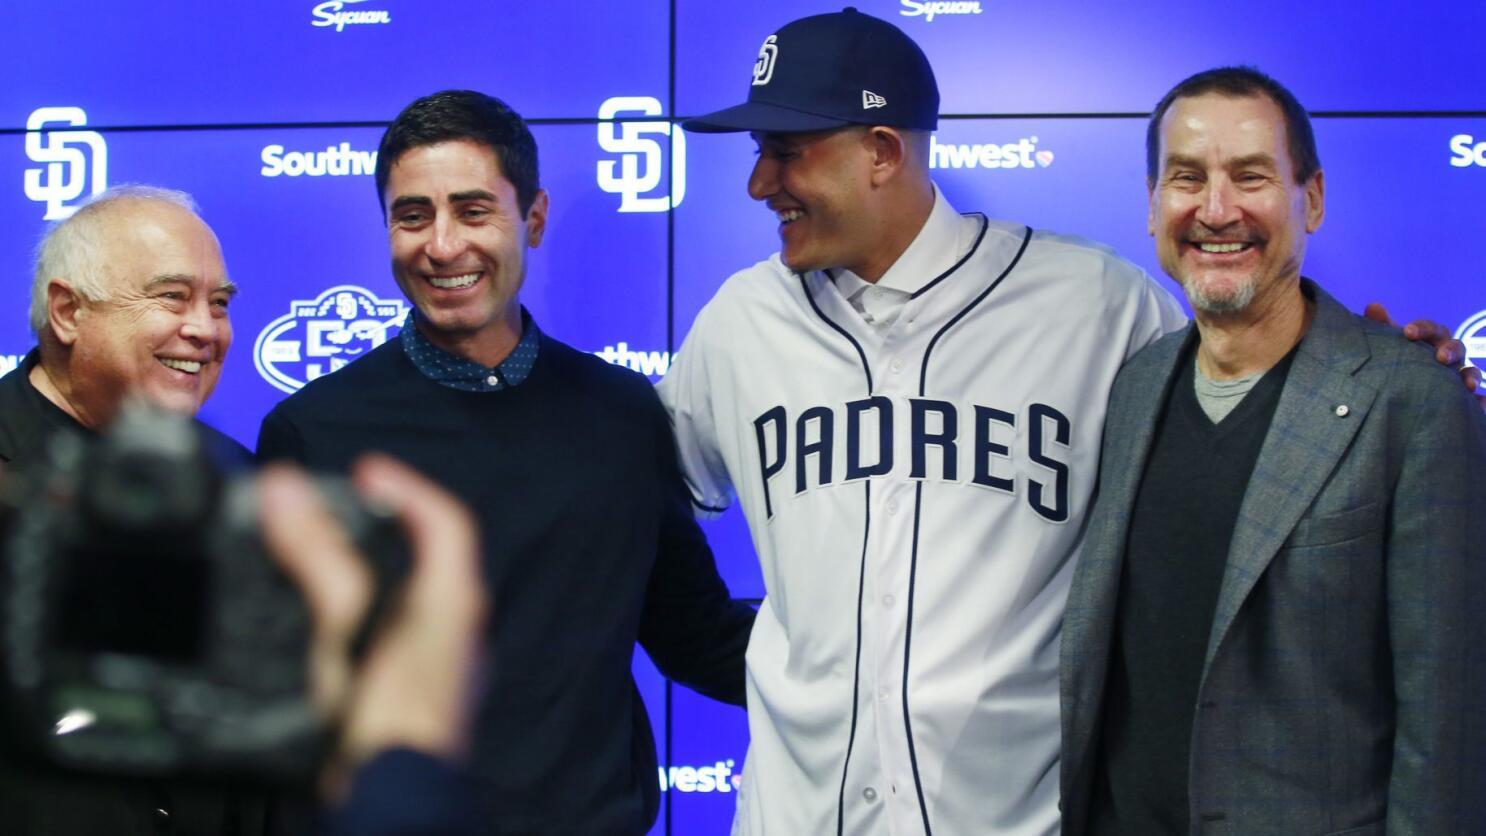 Column: Machado move reshapes Padres opening day, perception of club owners  - The San Diego Union-Tribune